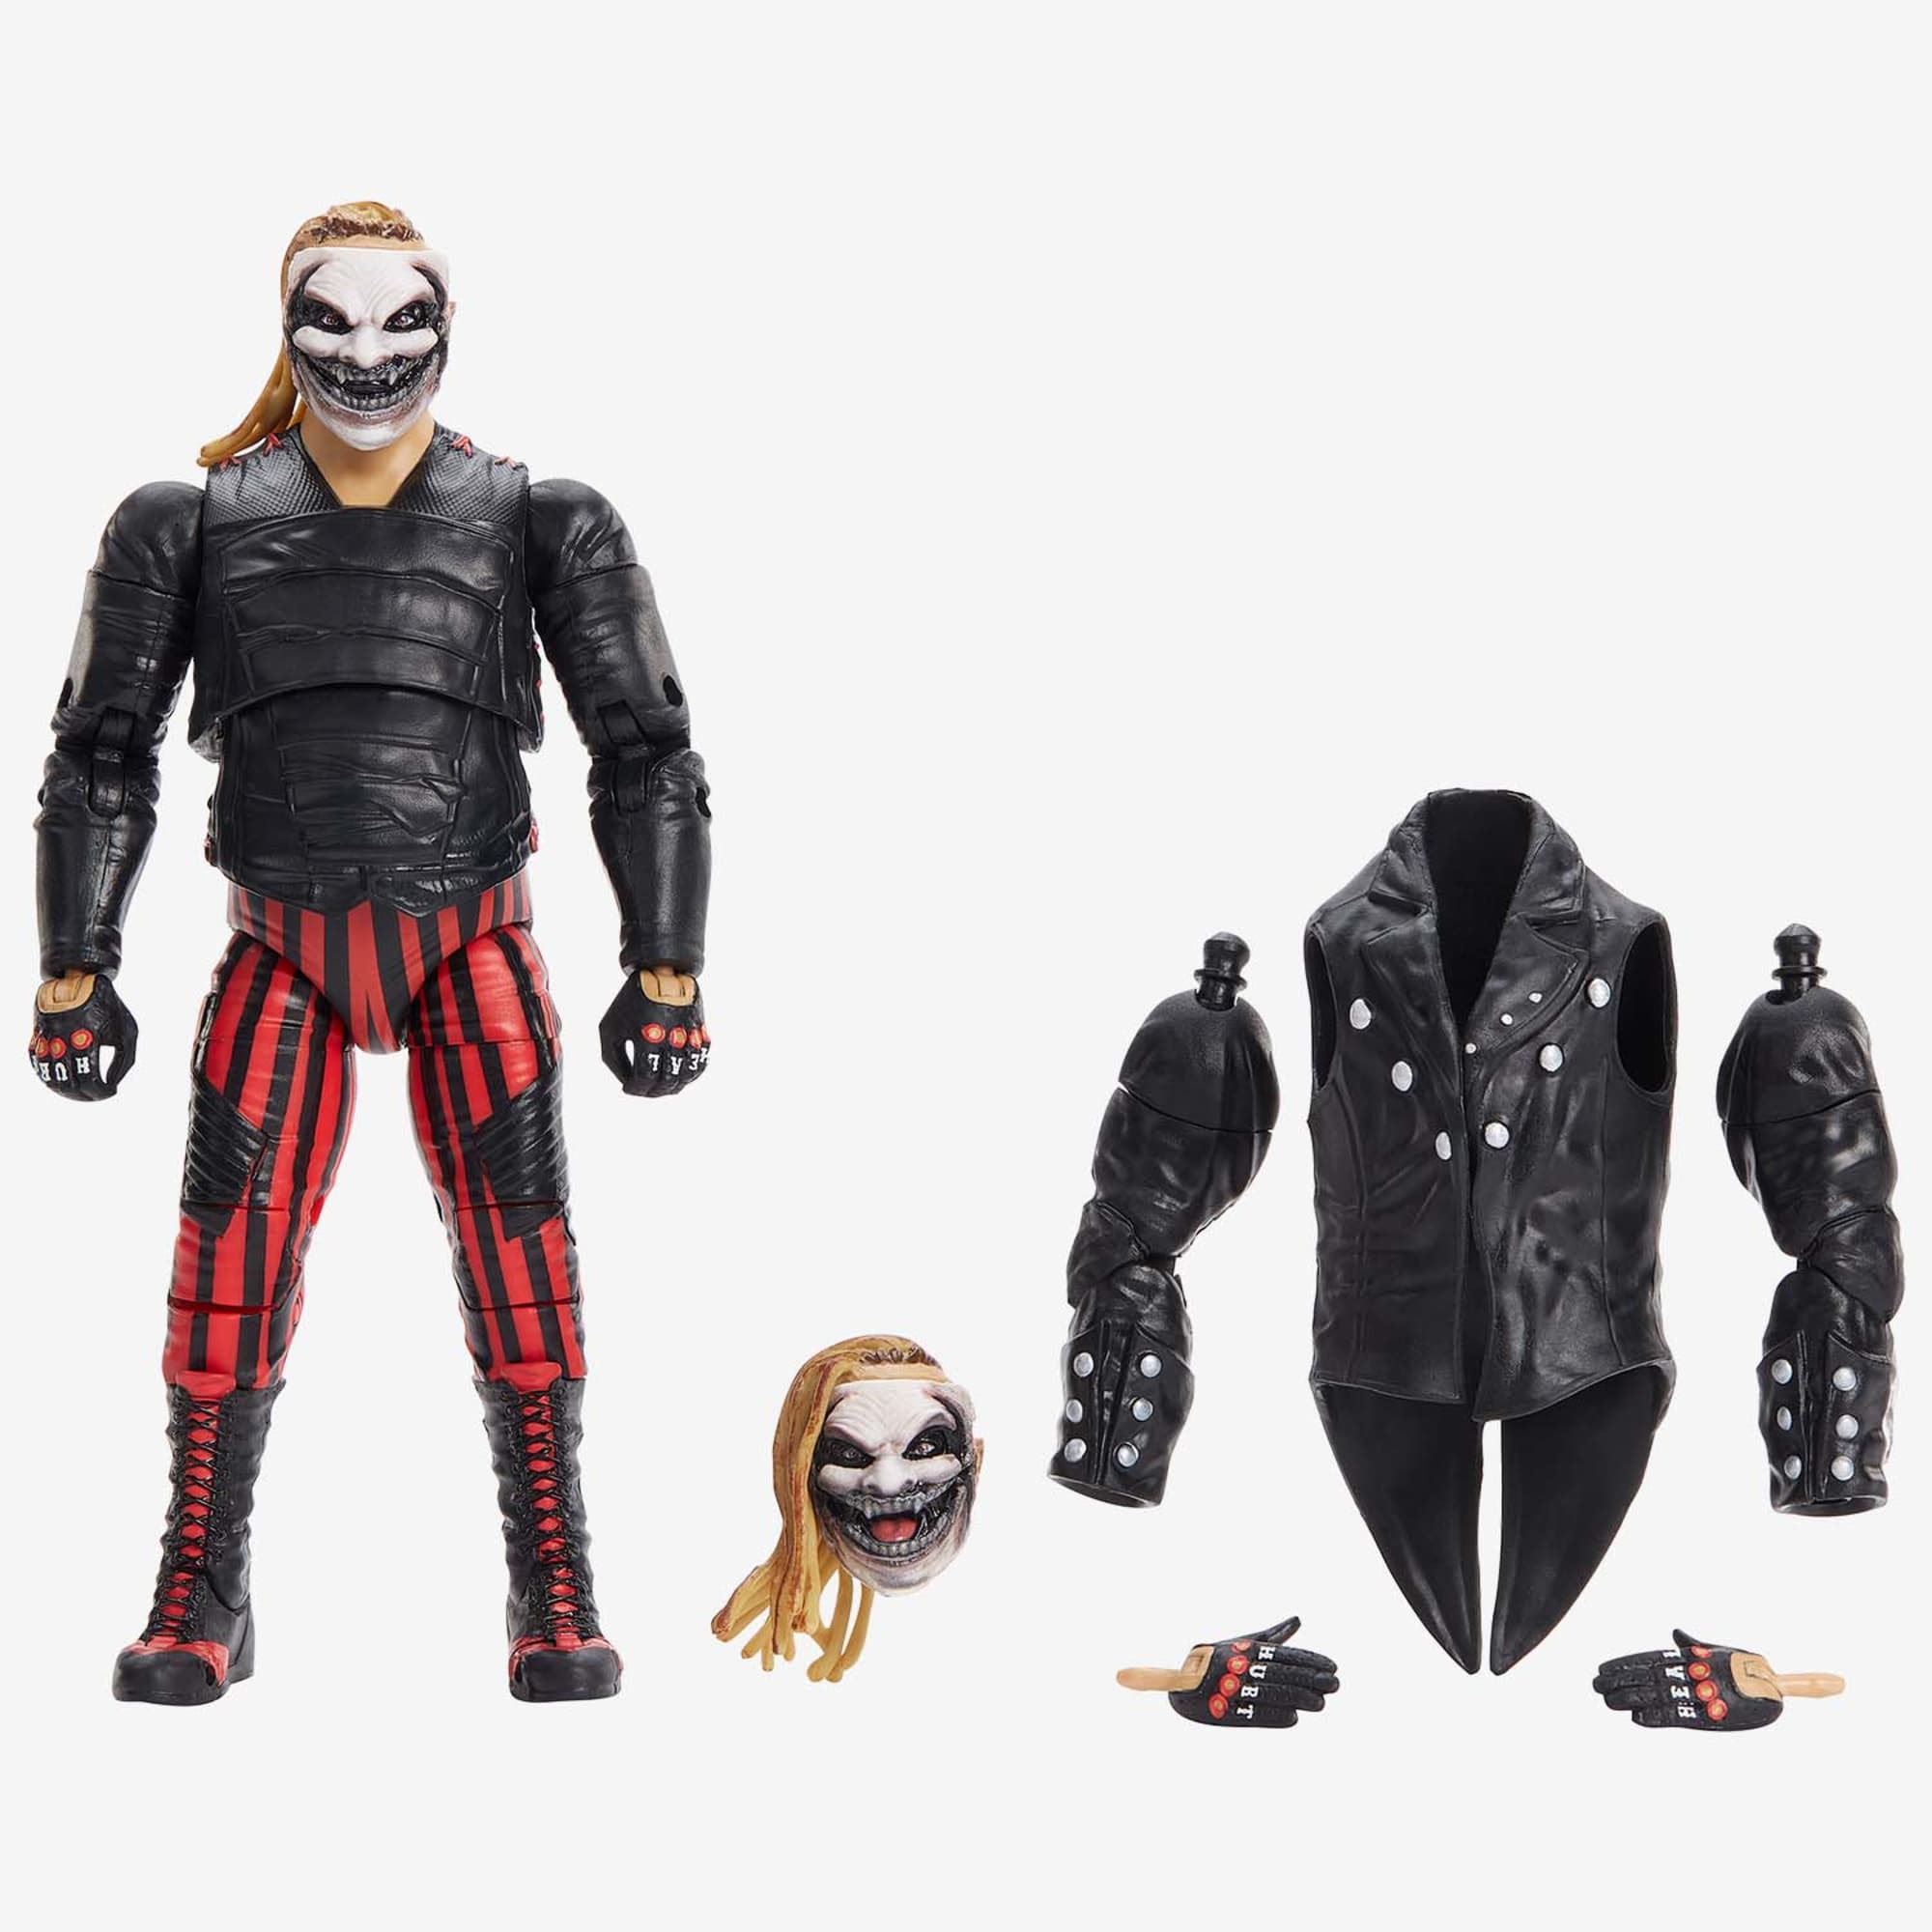 WWE® "The Fiend" Bray Wyatt™ Ultimate Edition Action Figure